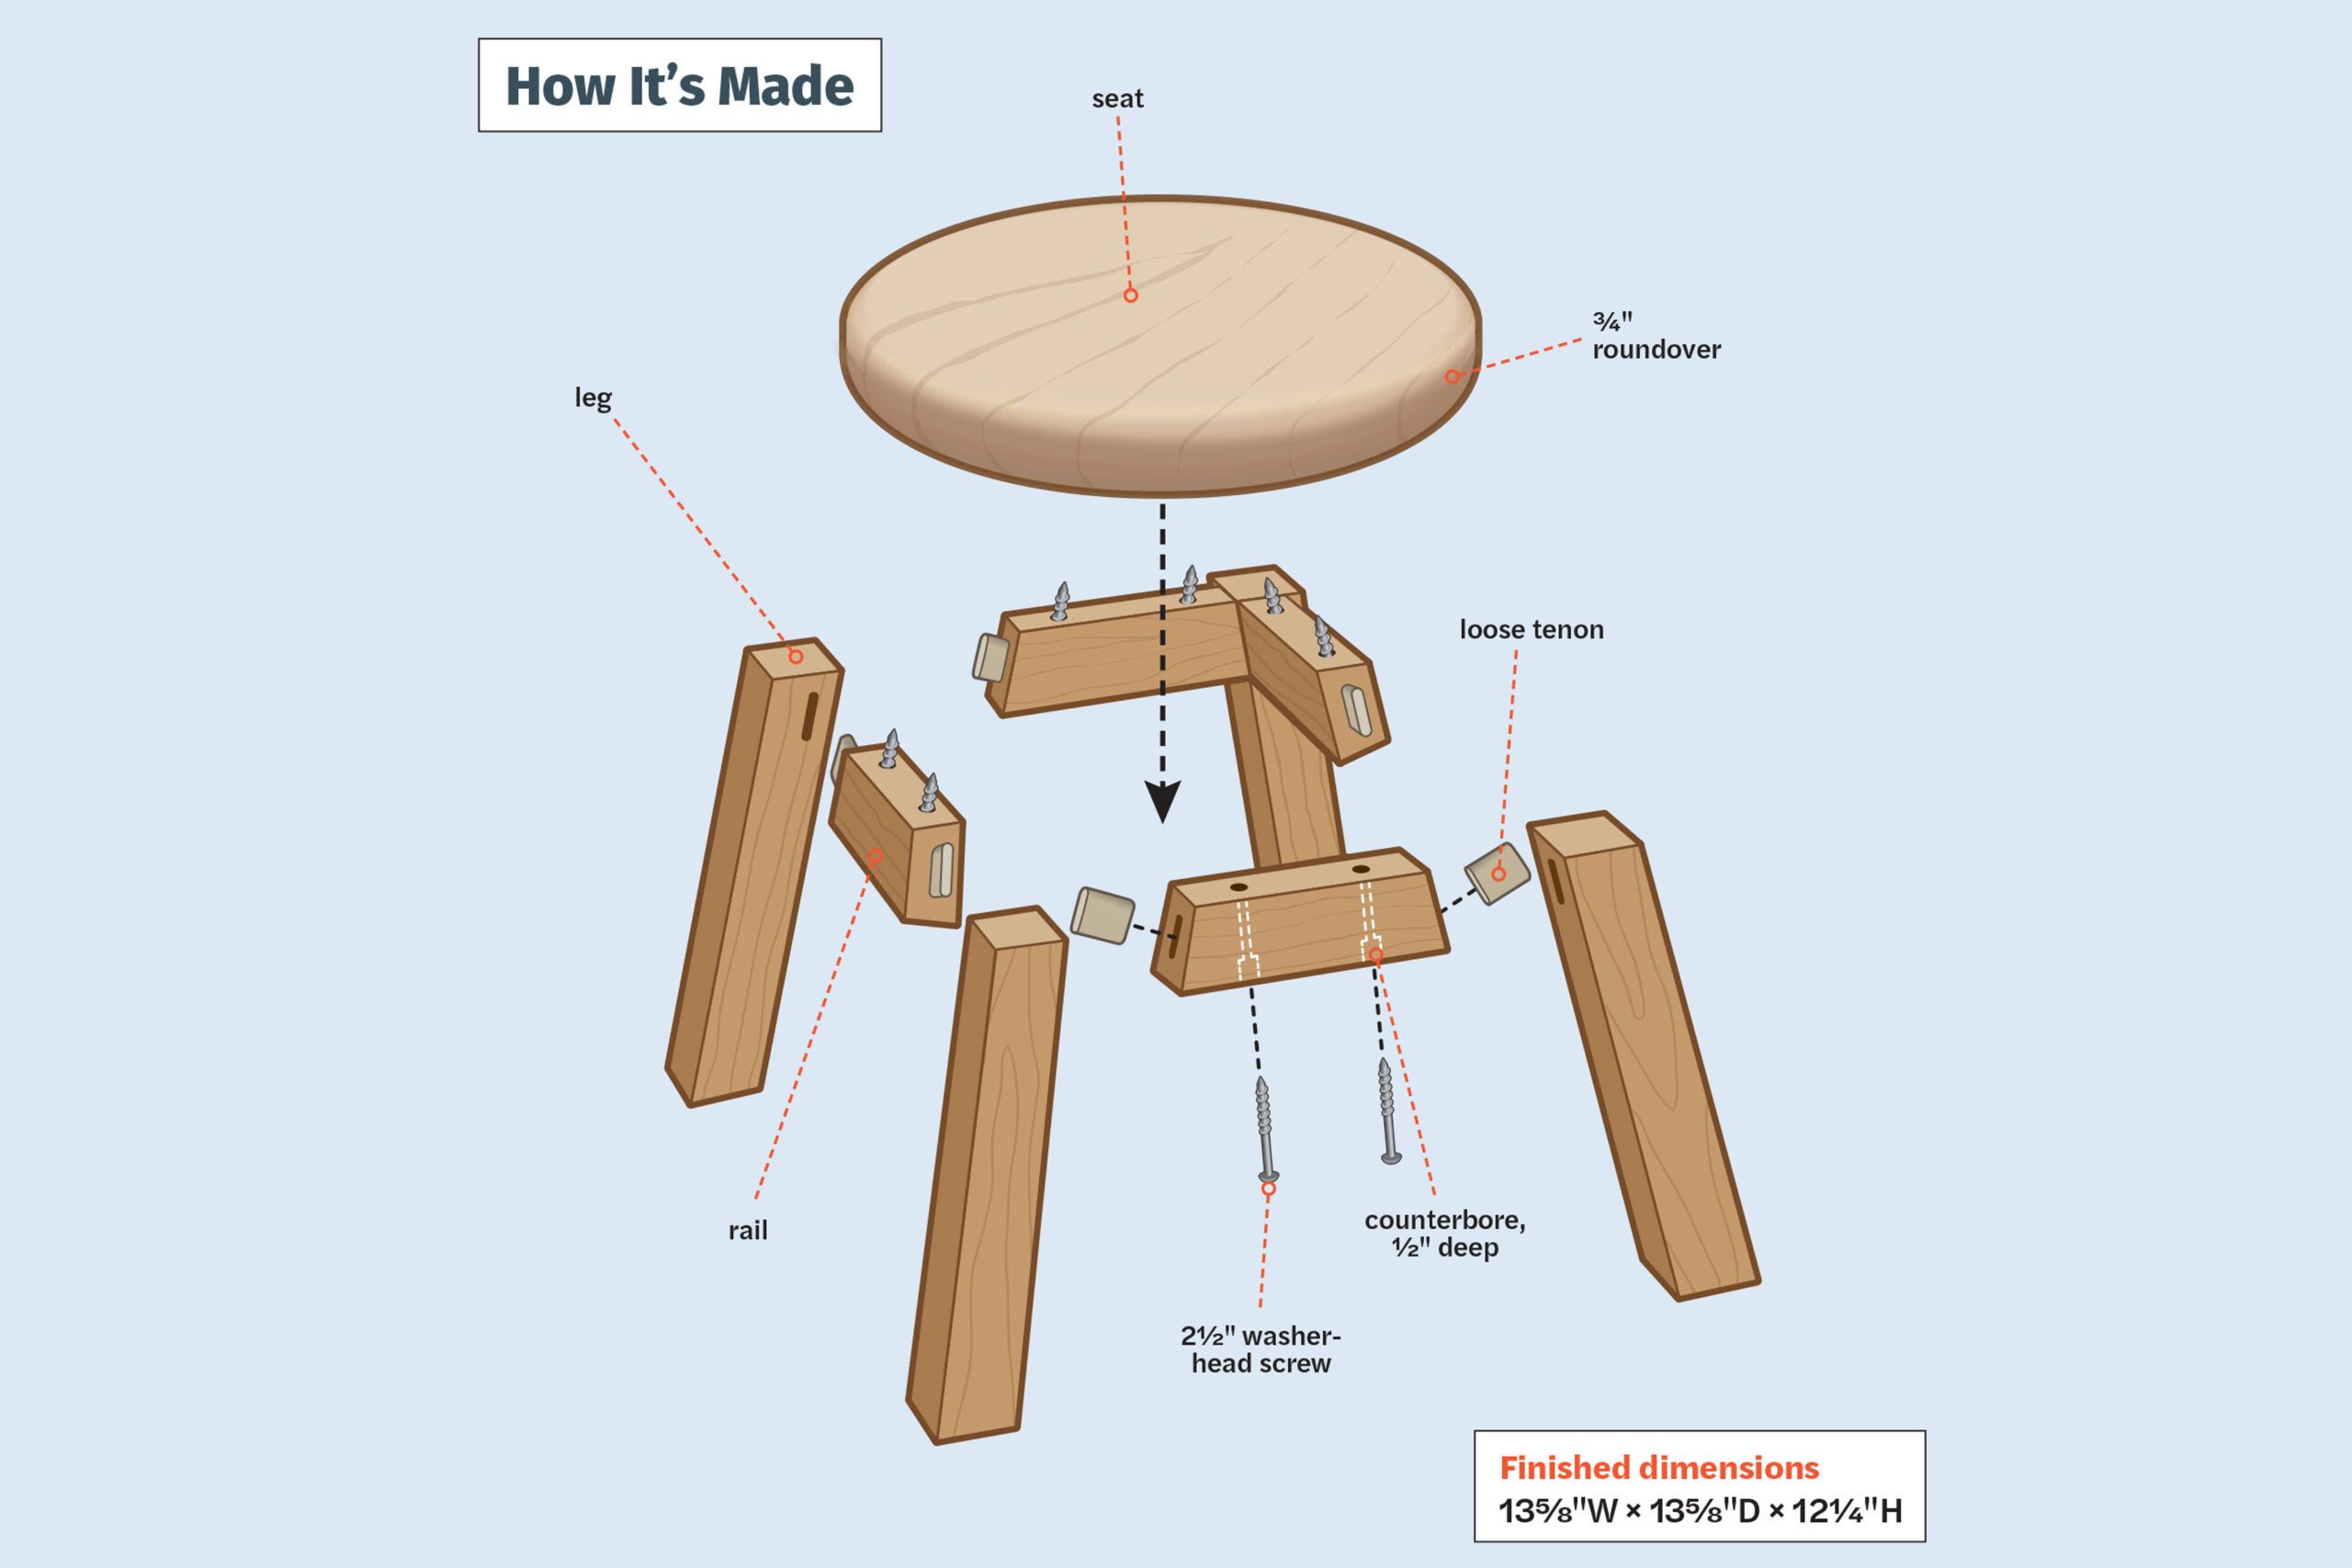 Workshop, Milking Stool, How's It's Made, Illustration